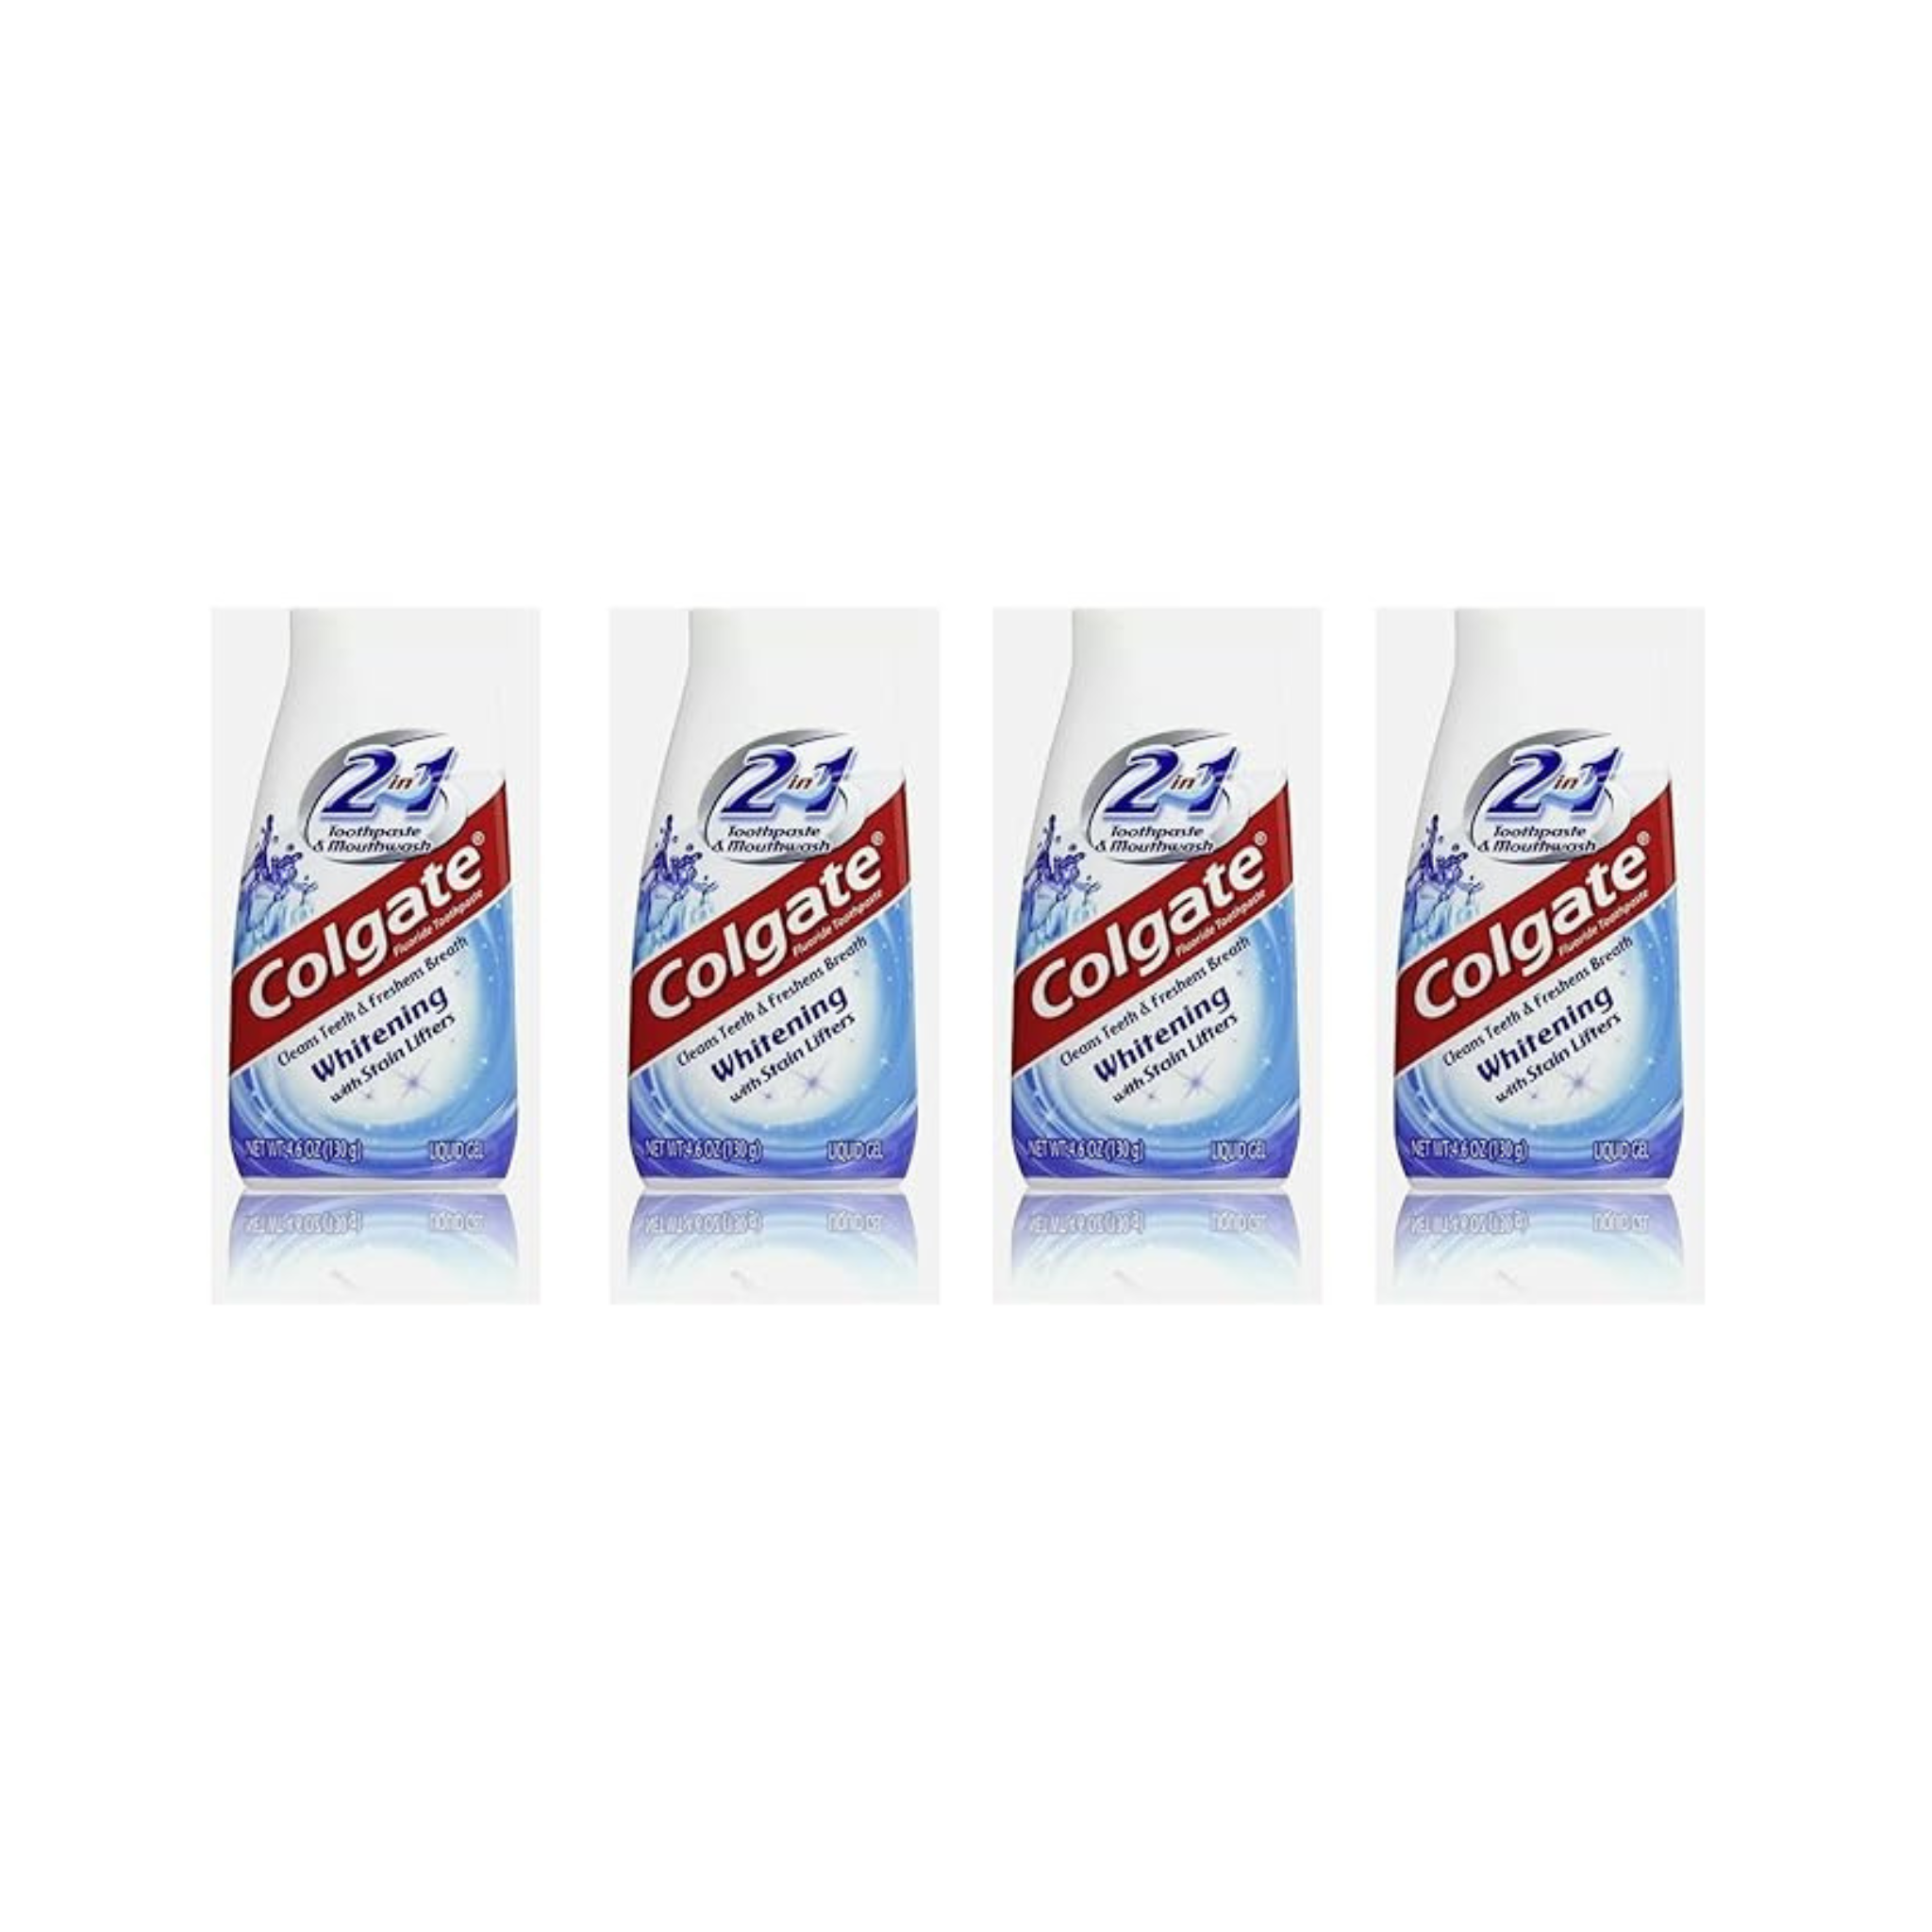 4 Pack Of Colgate 2-In-1 Whitening With Stain Lifters Toothpaste